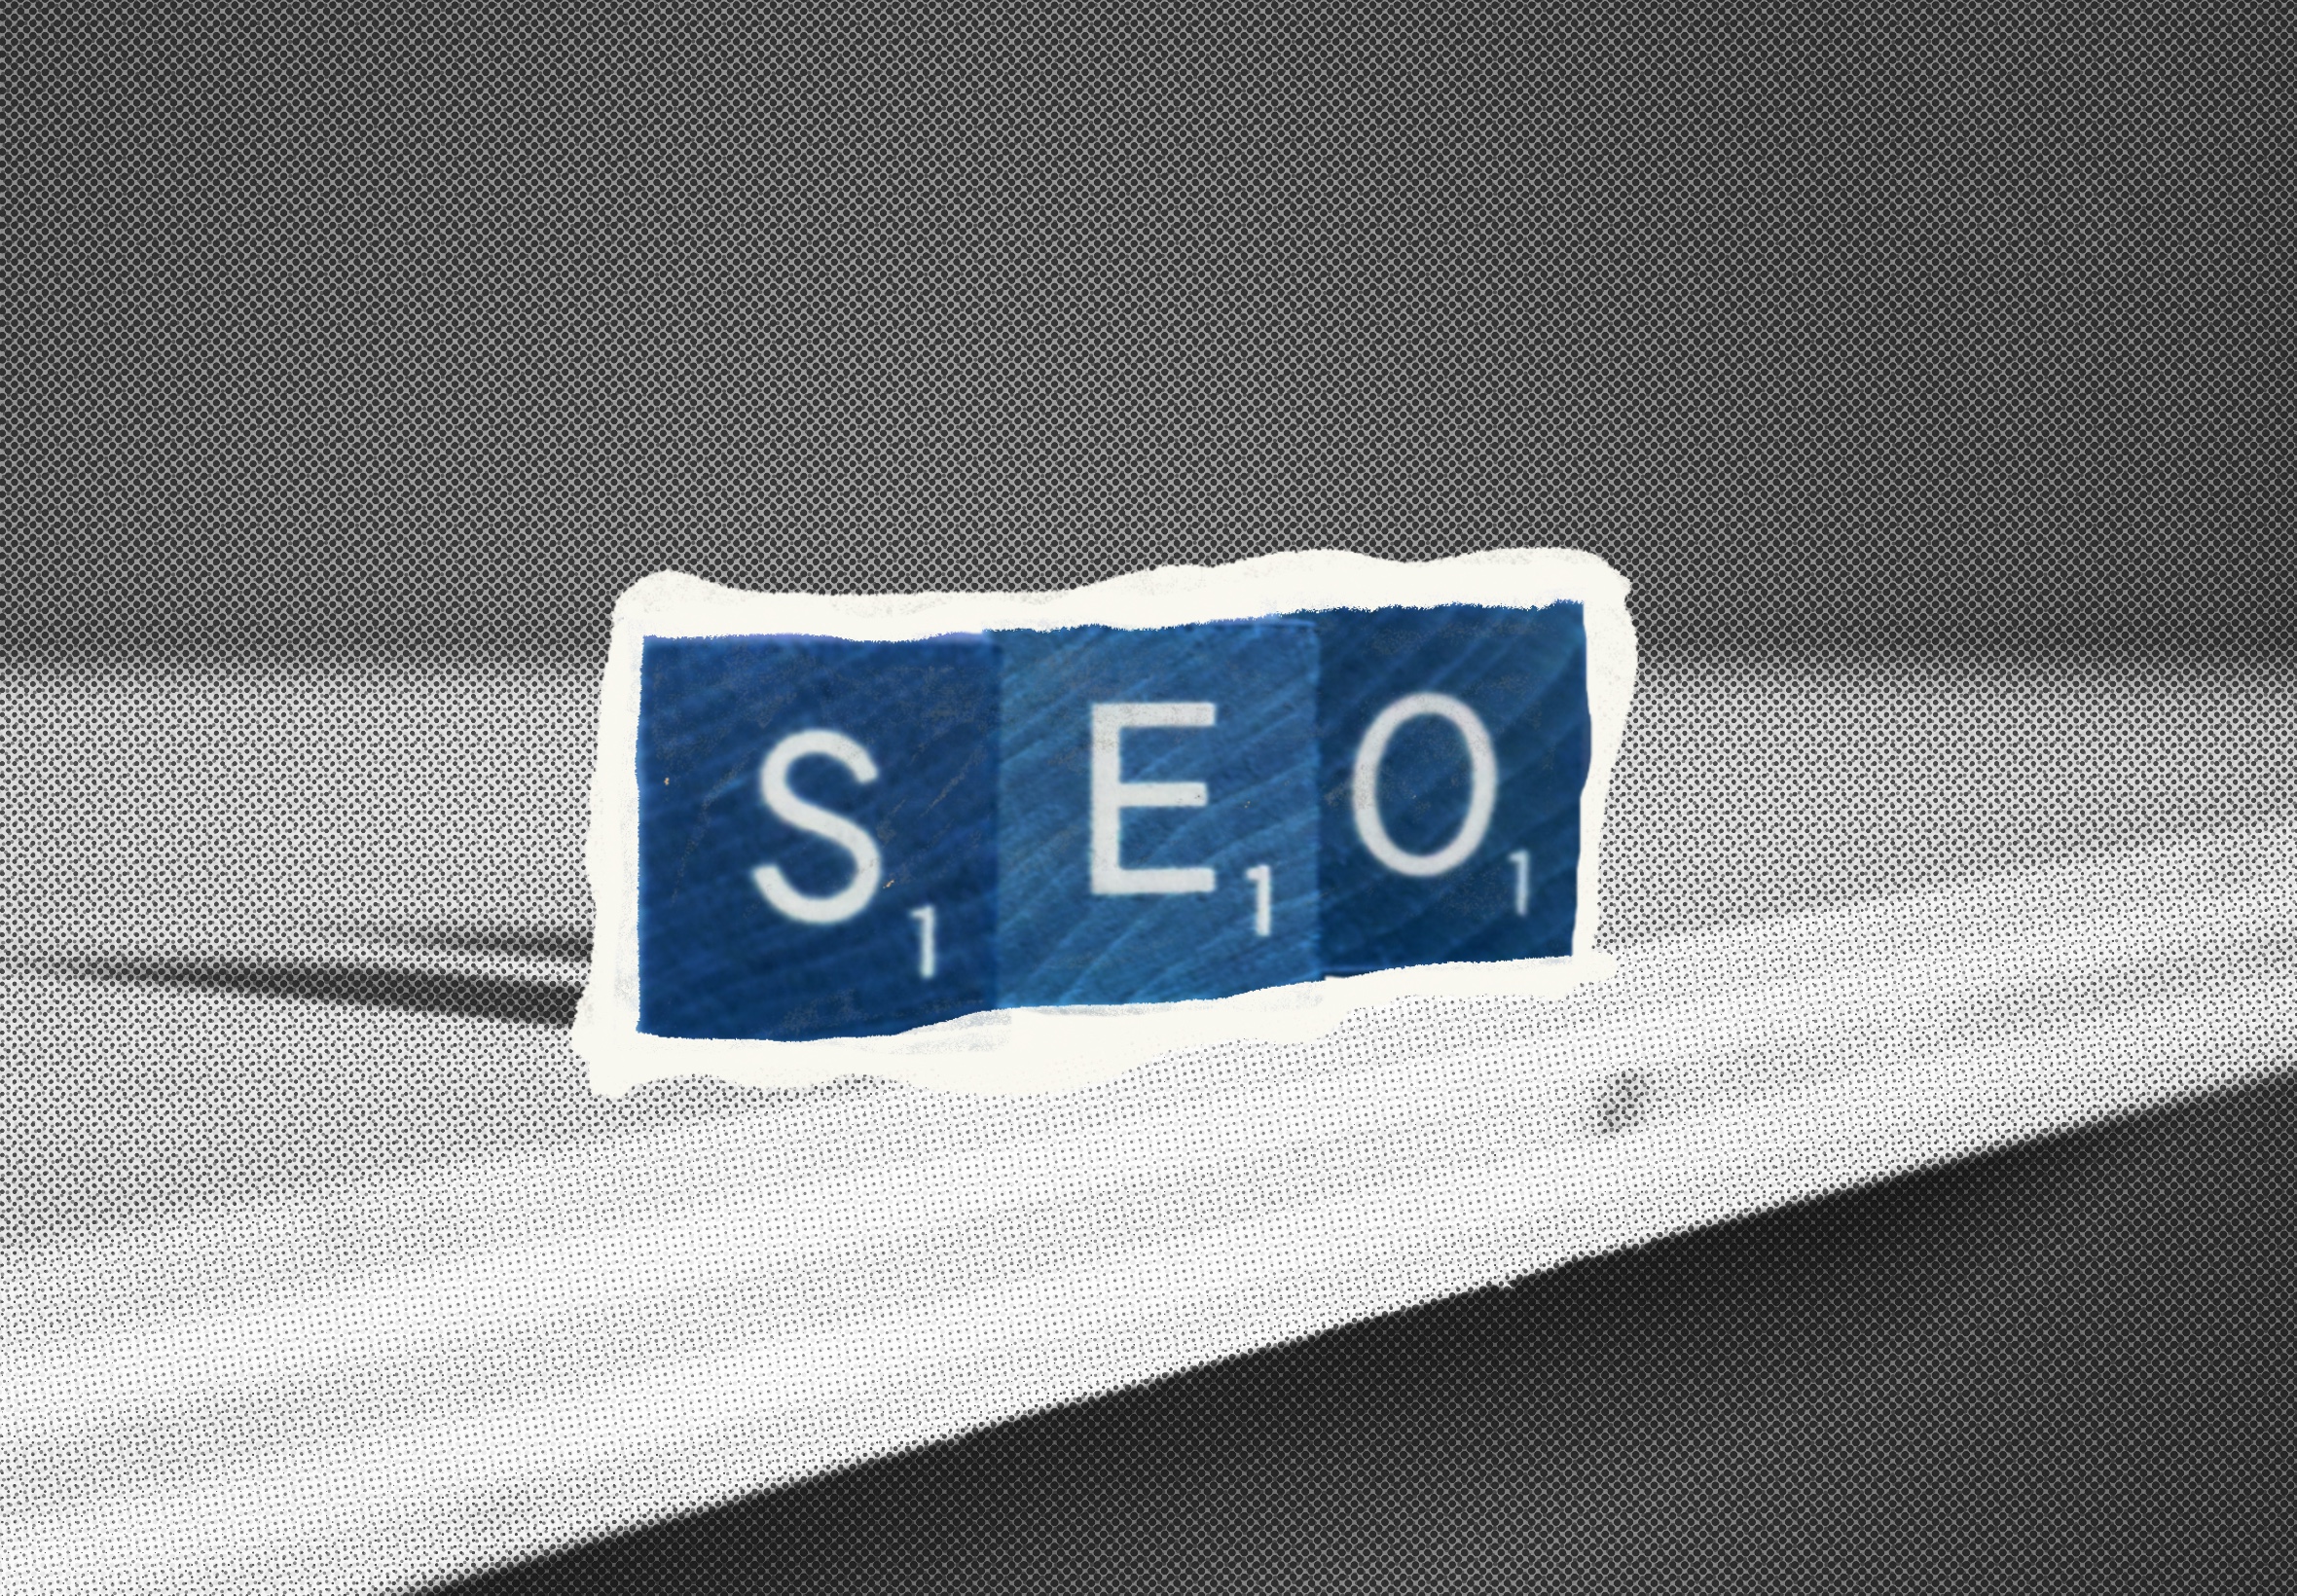 SEO 101: How to Optimize Your Website for Better Rankings